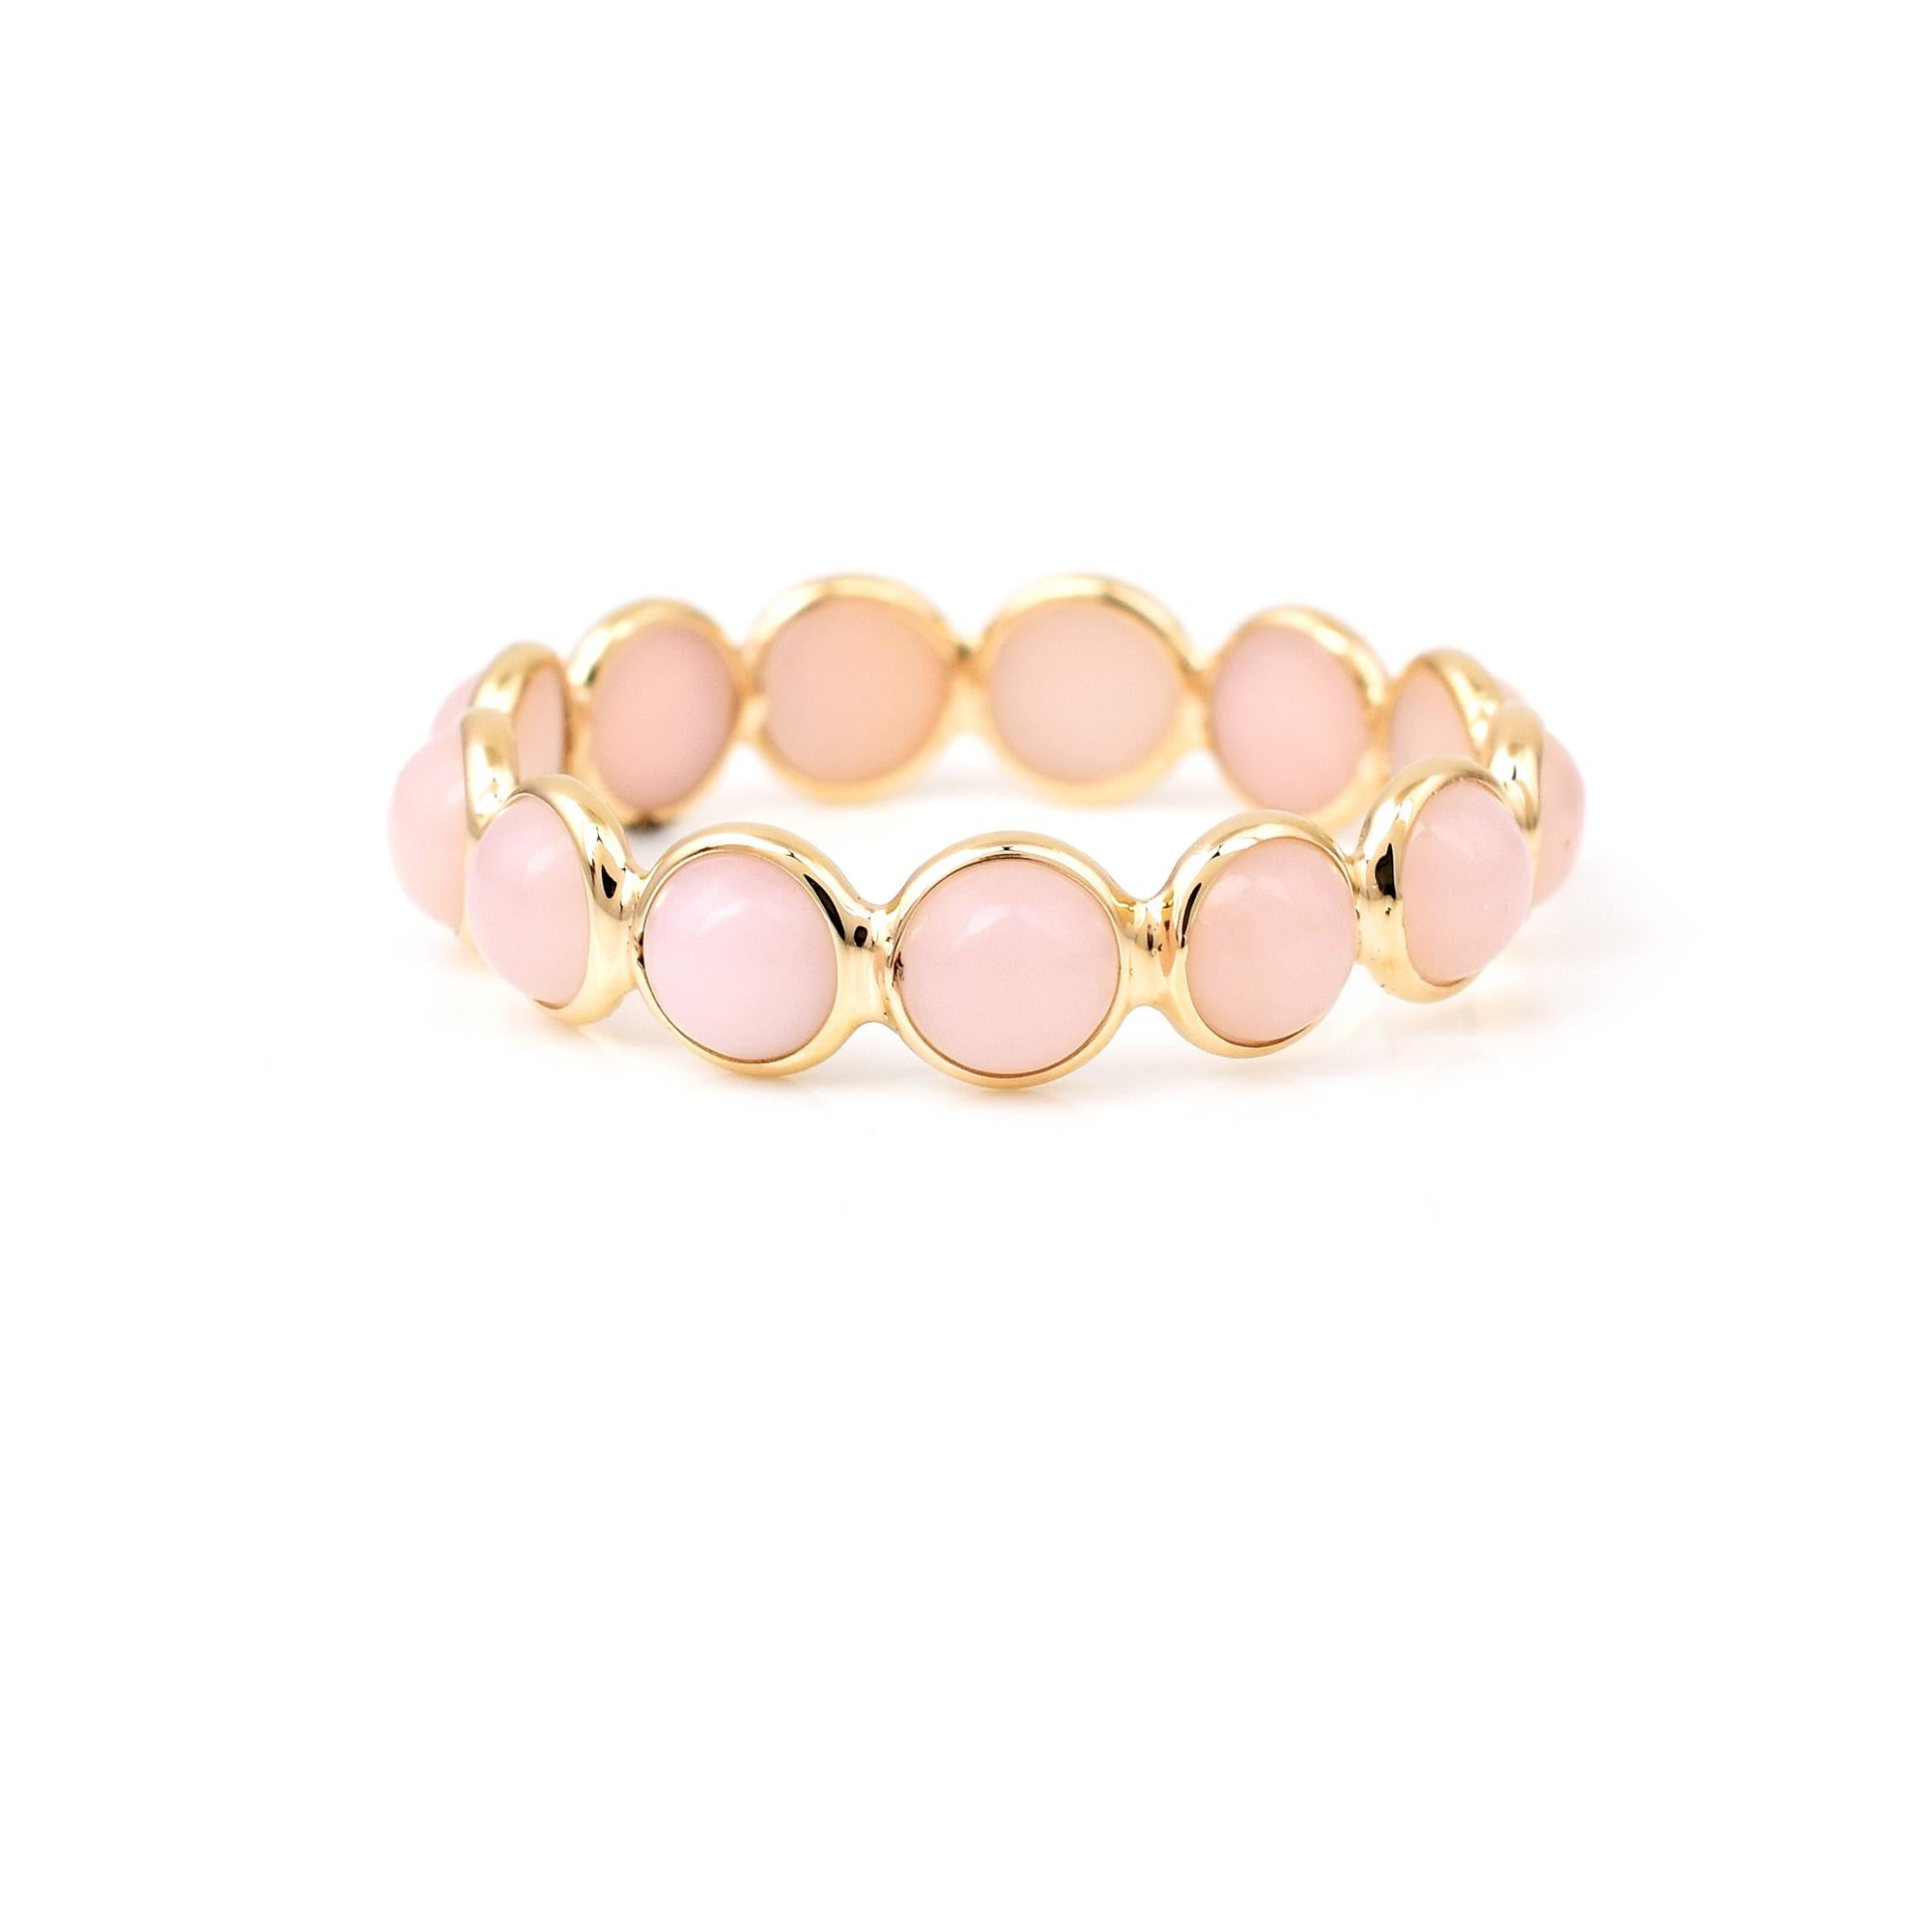 Shape: Round Cabochon

Stones: Pink Opal

Metal: 14 Karat Yellow Gold (can be customized)

Style: Single Line Band

Ring Size: US 7.50 (can be customized)

Stone Weight: appx. 2.80 carats of Pink Opal

Total Weight: 1.07 grams